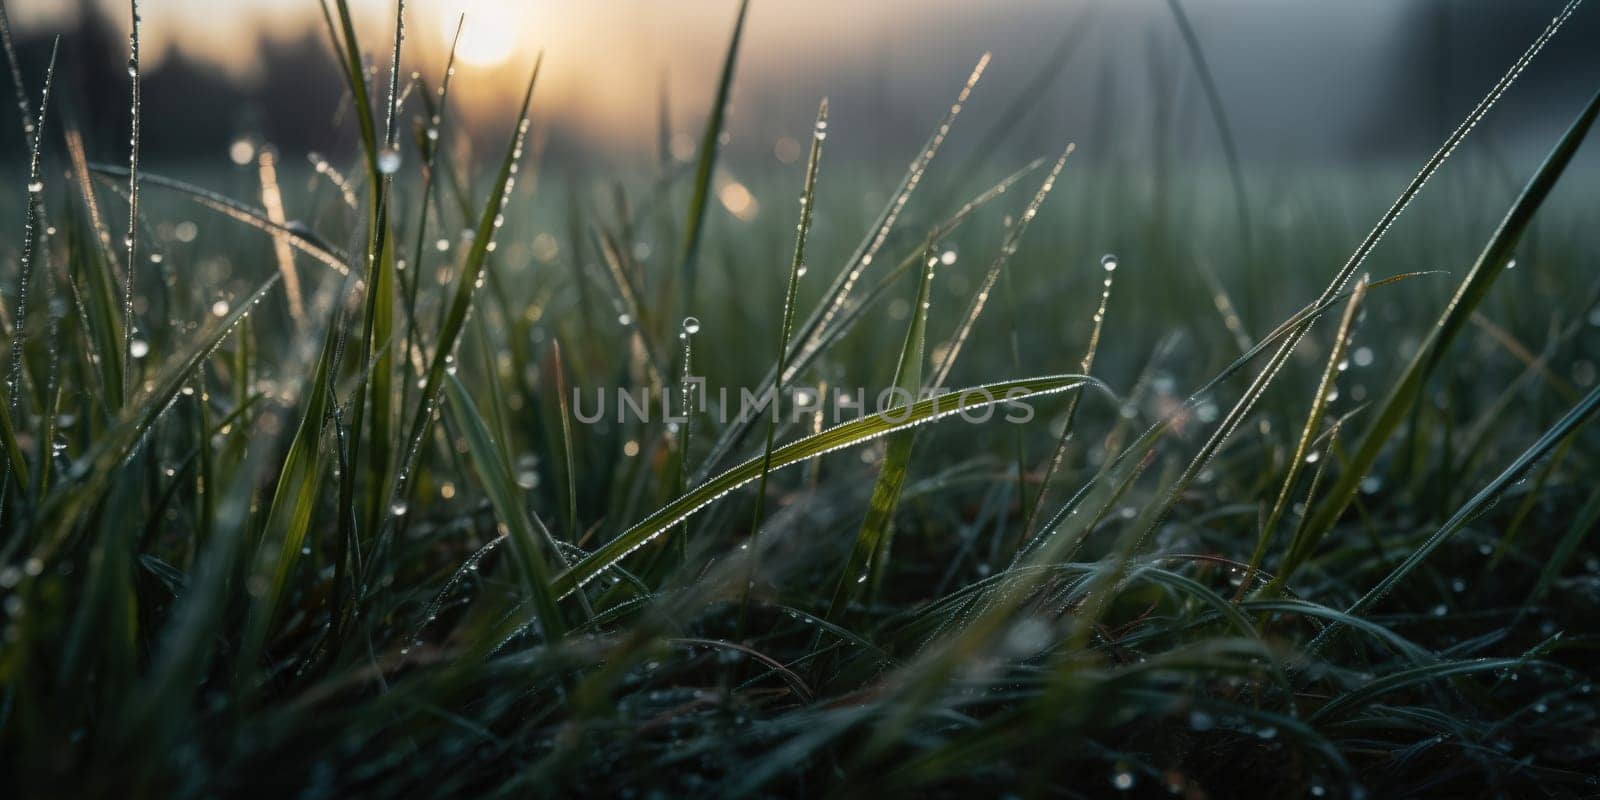 Morning grass with drops of dew, close up view at sunrise